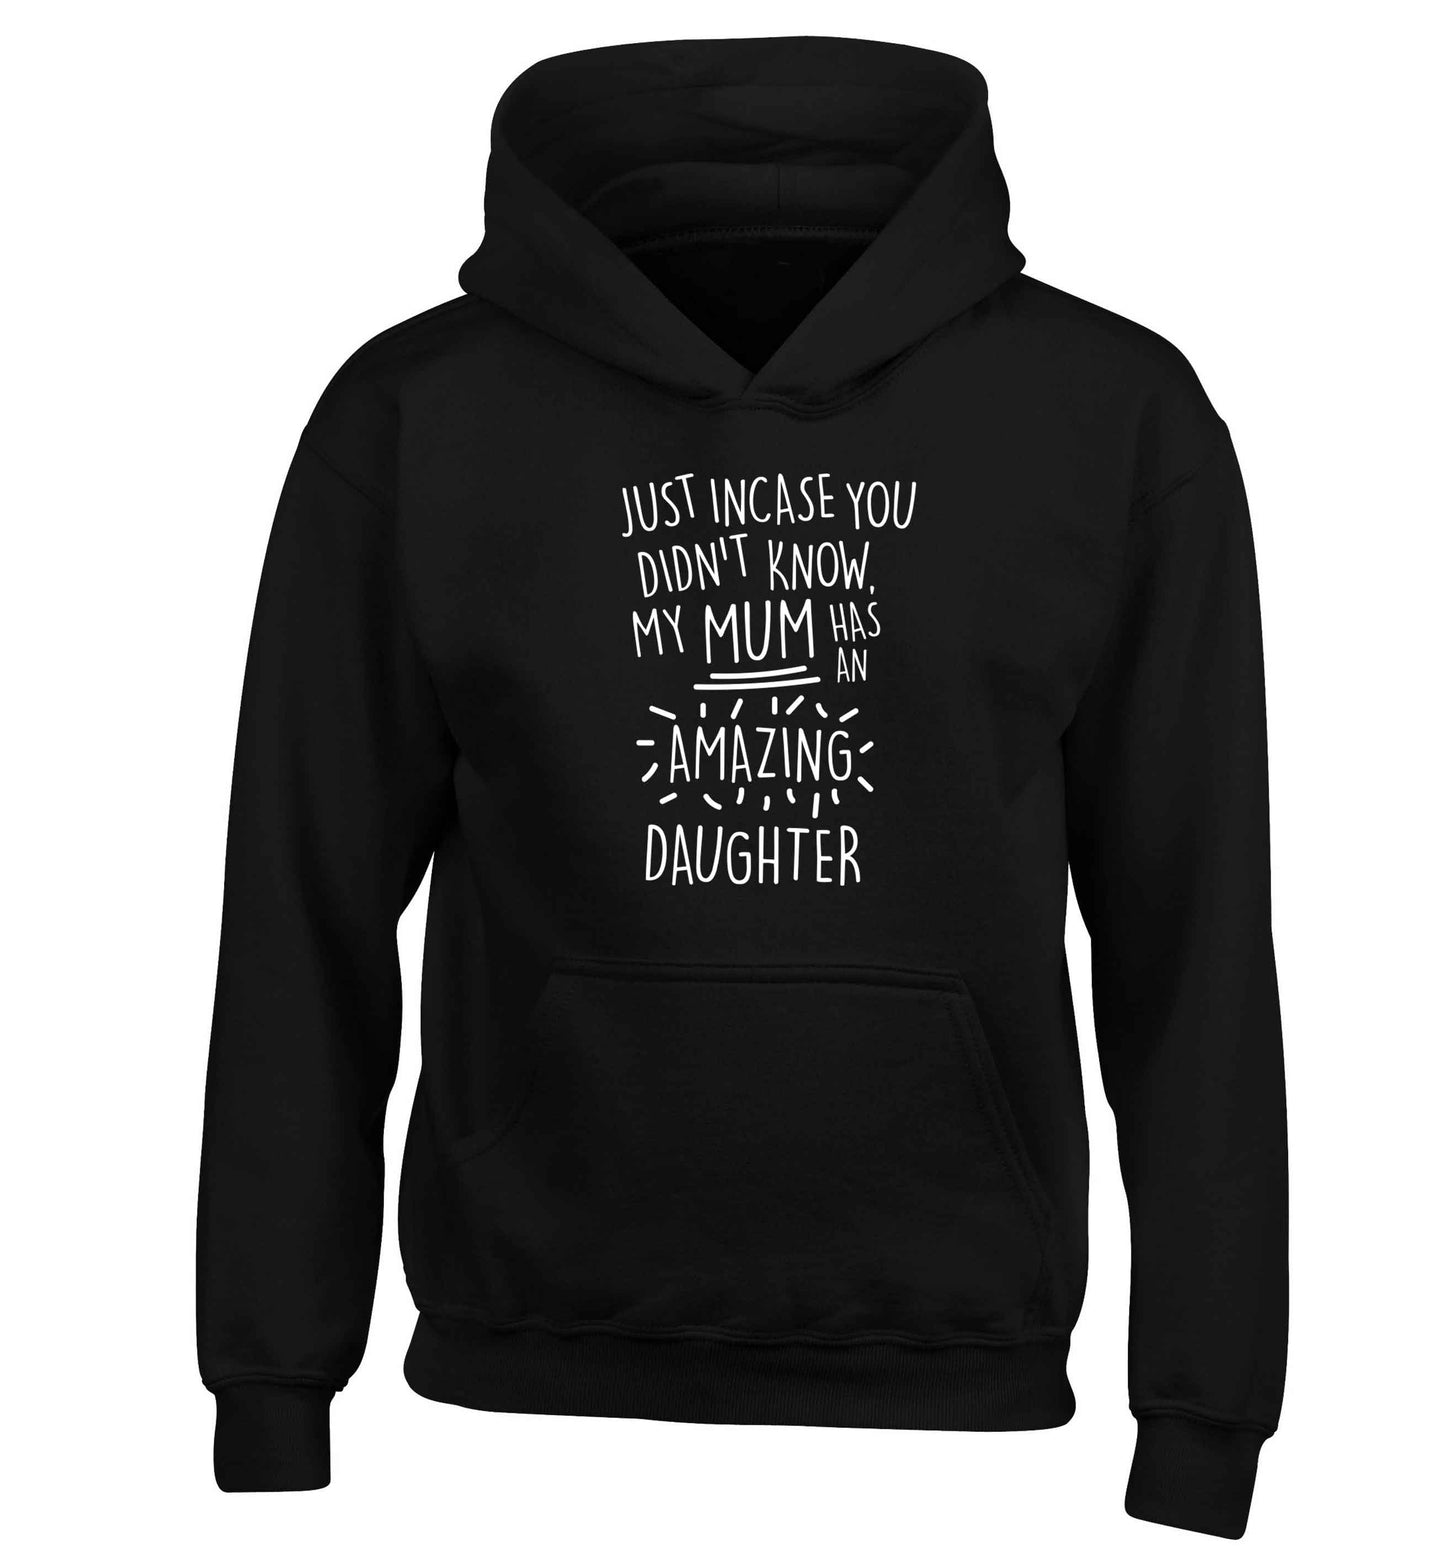 Just incase you didn't know my mum has an amazing daughter children's black hoodie 12-13 Years